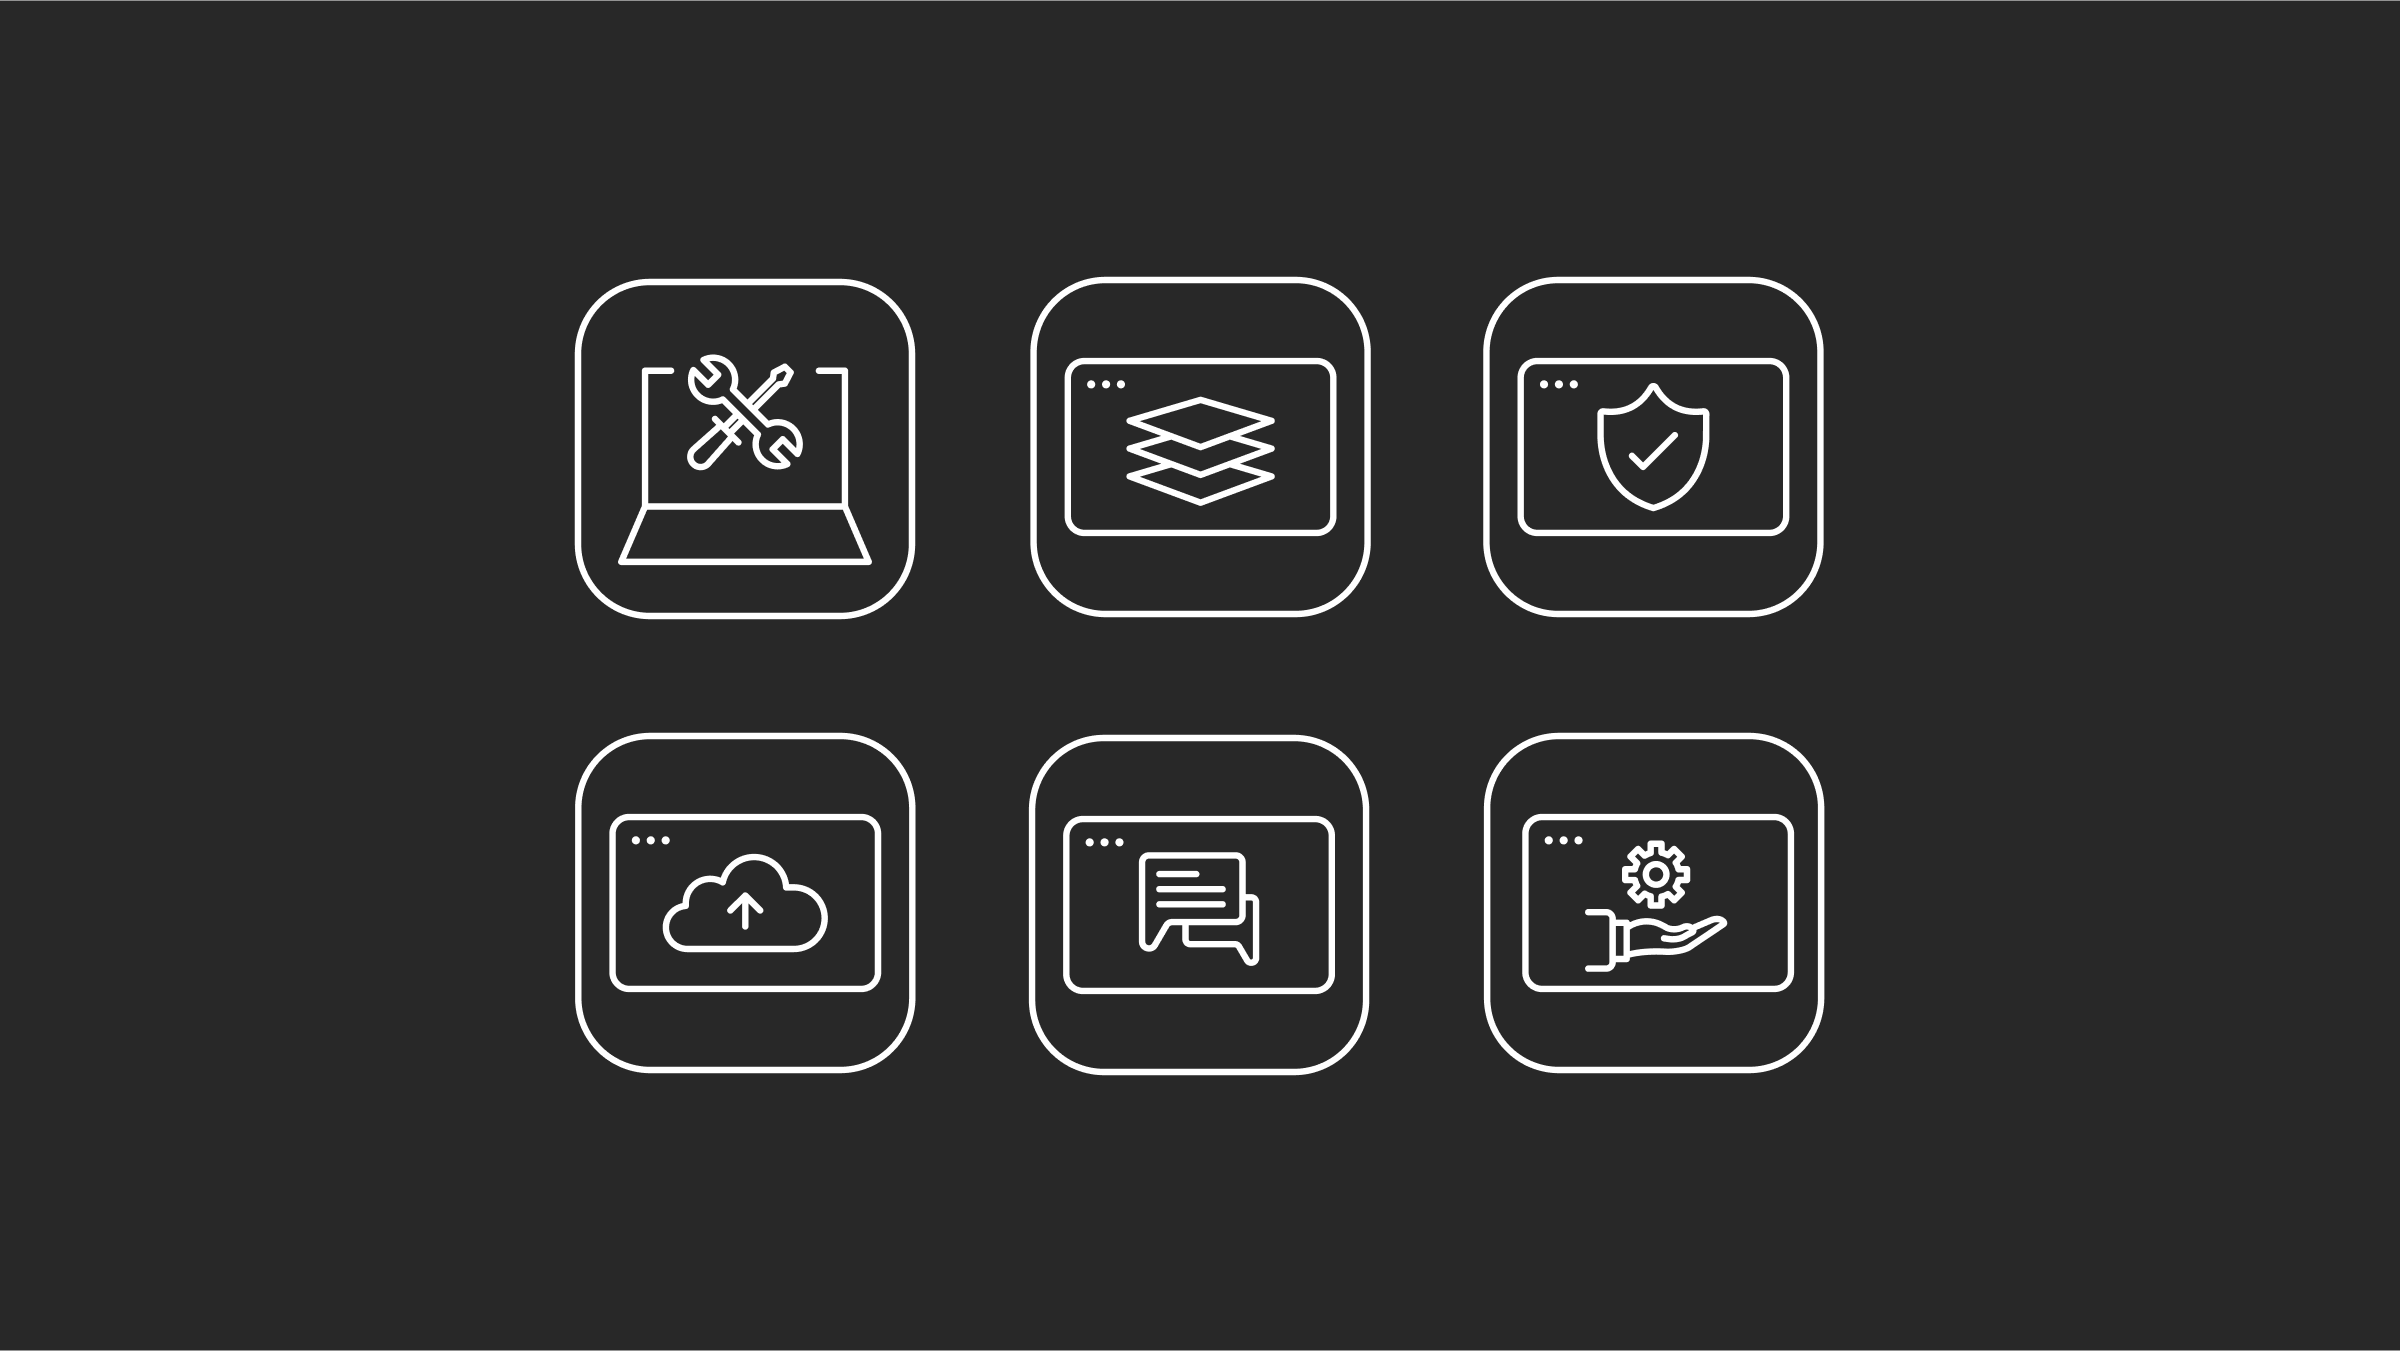 Infographic with icons showing the types of IT services.